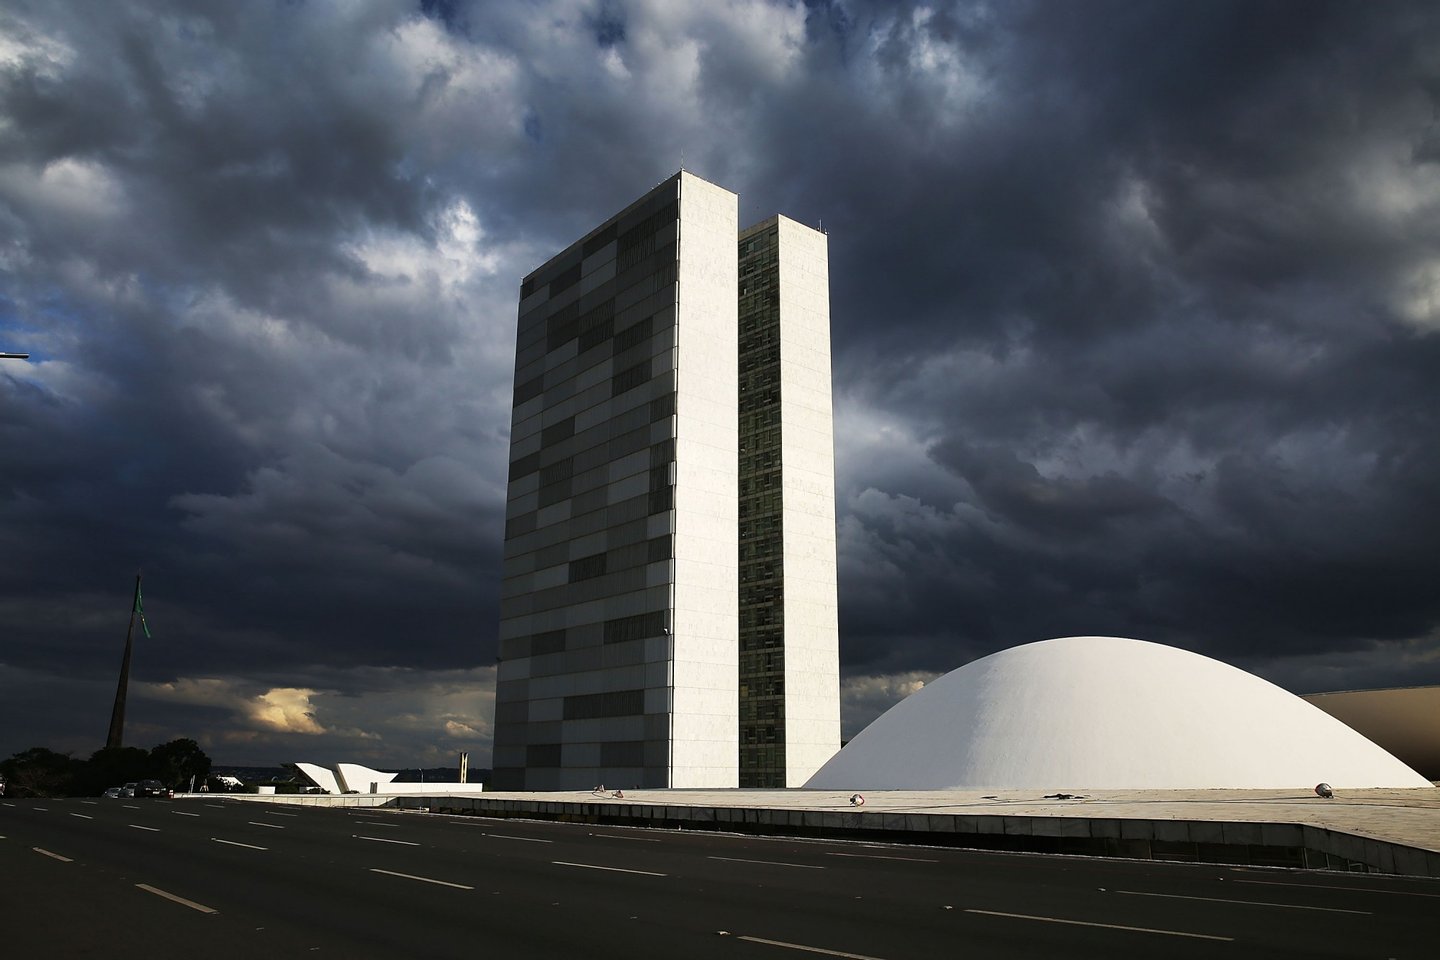 BRASILIA, BRAZIL - OCTOBER 27: The Brazilian National Congress building is shown on October 27, 2014 in Brasilia, Brazil. Brazil's left-wing President Dilma Rousseff was narrowly re-elected yesterday and will serve another four years in Brazil's unique planned capital city. The modernist city was founded in 1960 and replaced Rio de Janeiro as the federal capital of Brazil. The city was designed by urban planner Lucio Costa and architect Oscar Niemeyer and is now a UNESCO World Hertiage site. (Photo by Mario Tama/Getty Images)